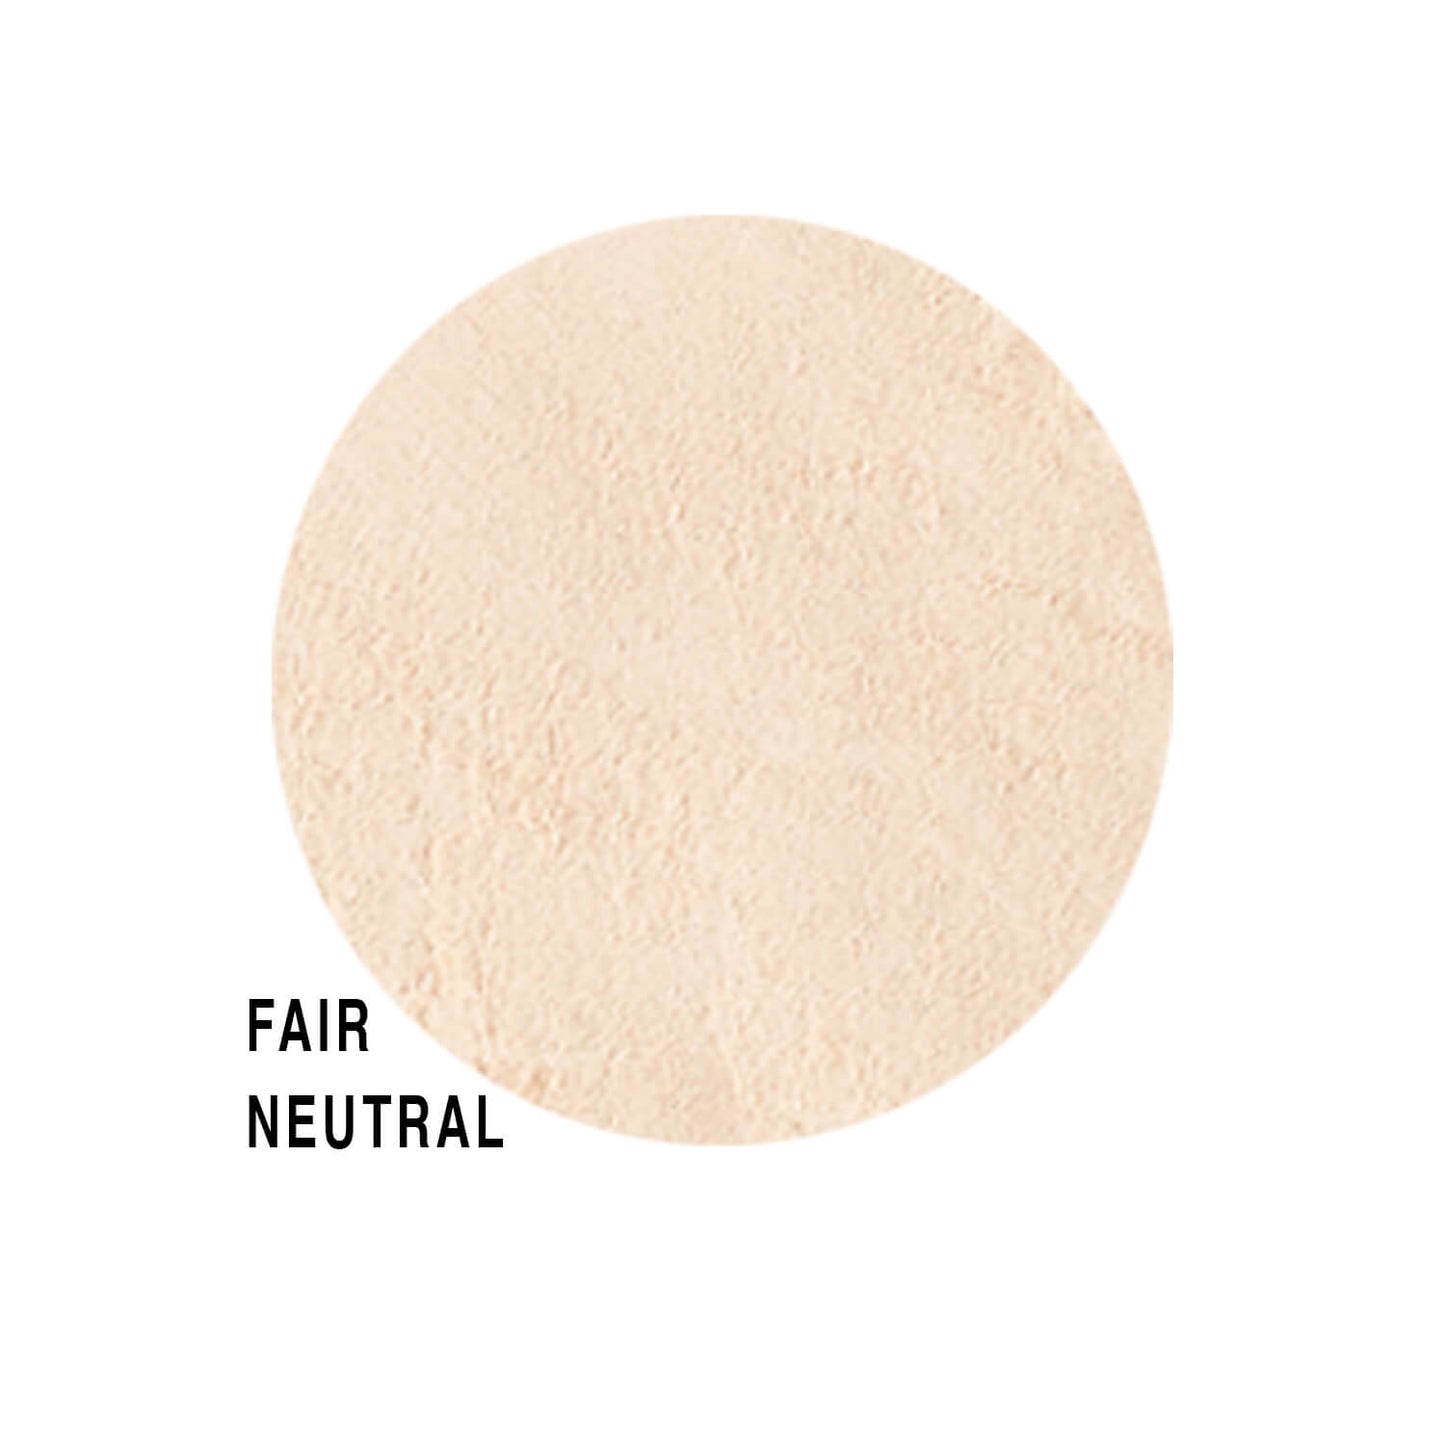 ulta makeup foundation fair neutral swatch available at heygirl.pk for delivery in Pakistan